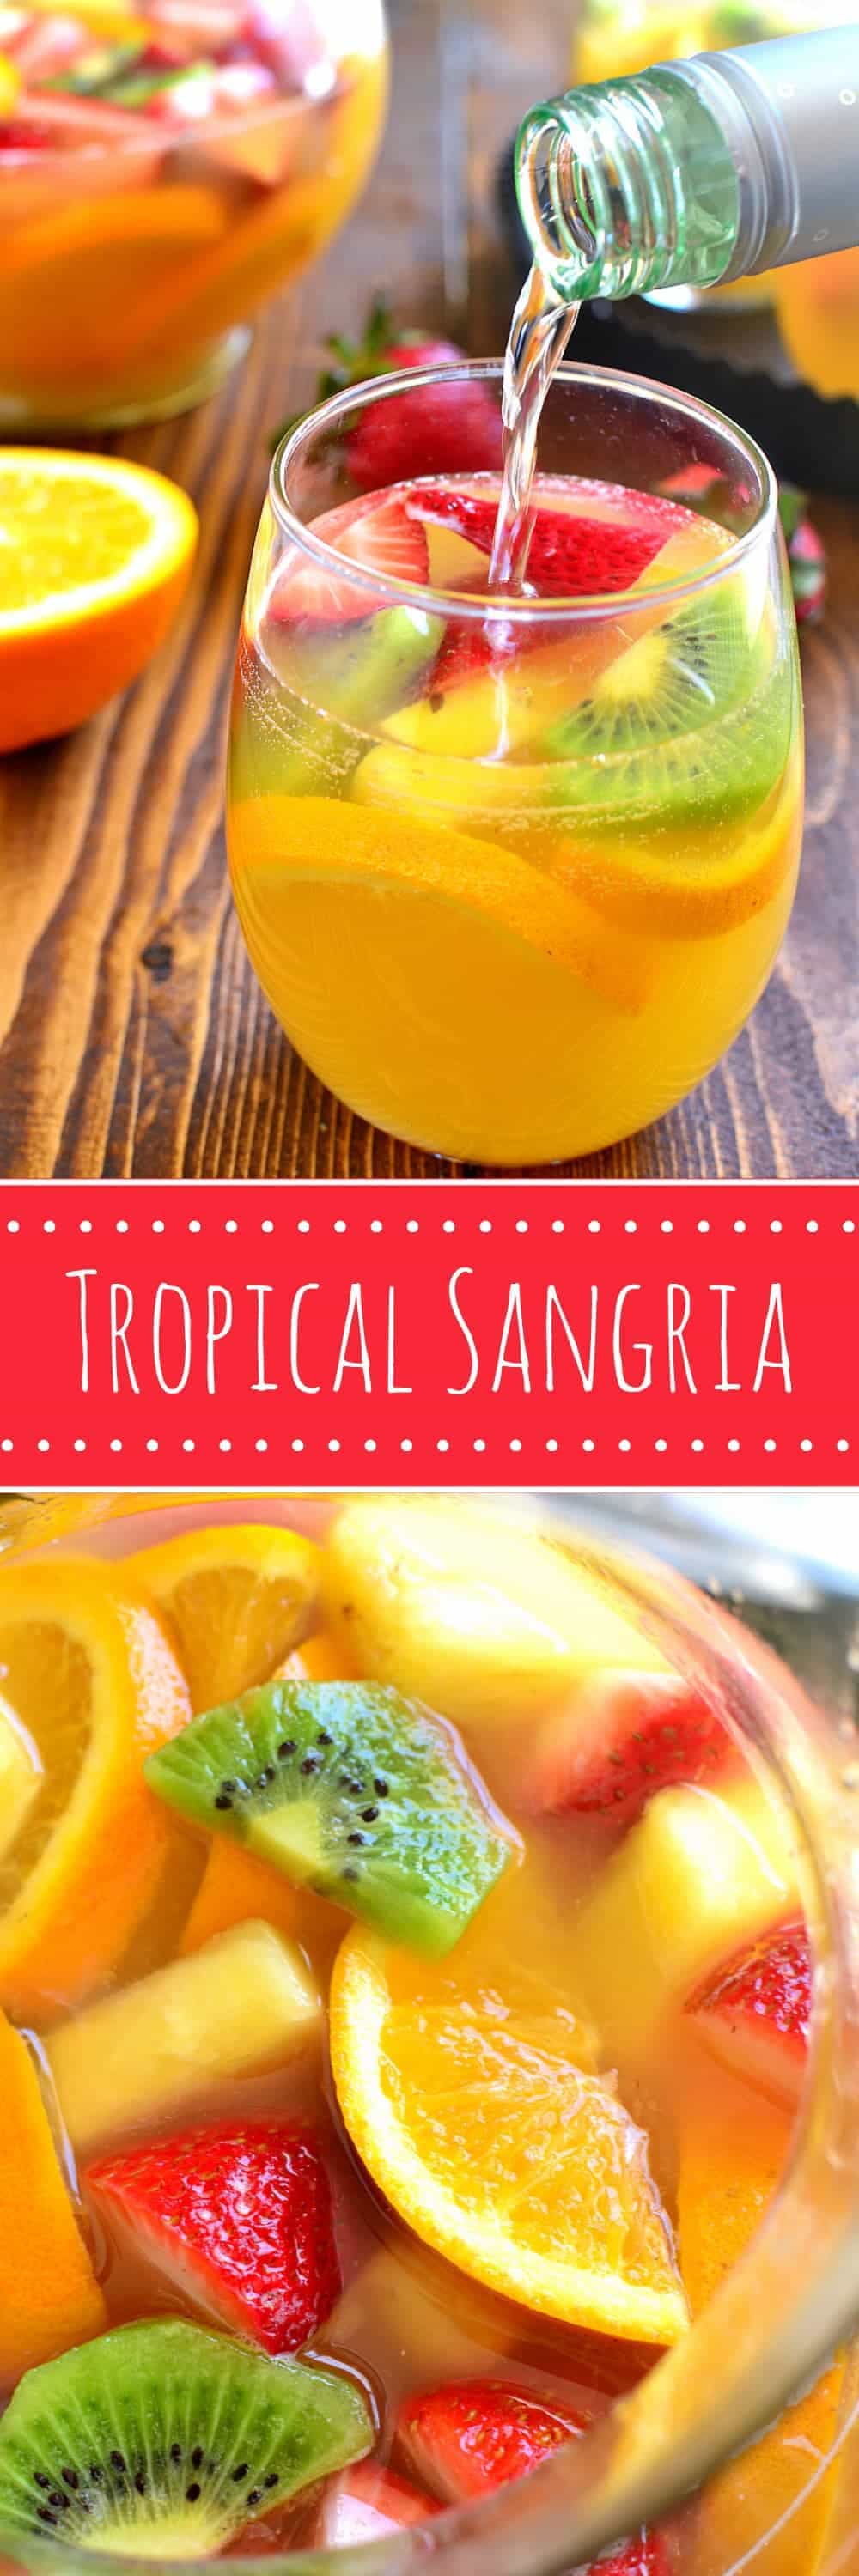 Tropical Sangria Lemon Tree Dwelling,What Is Cassava Called In Pakistan